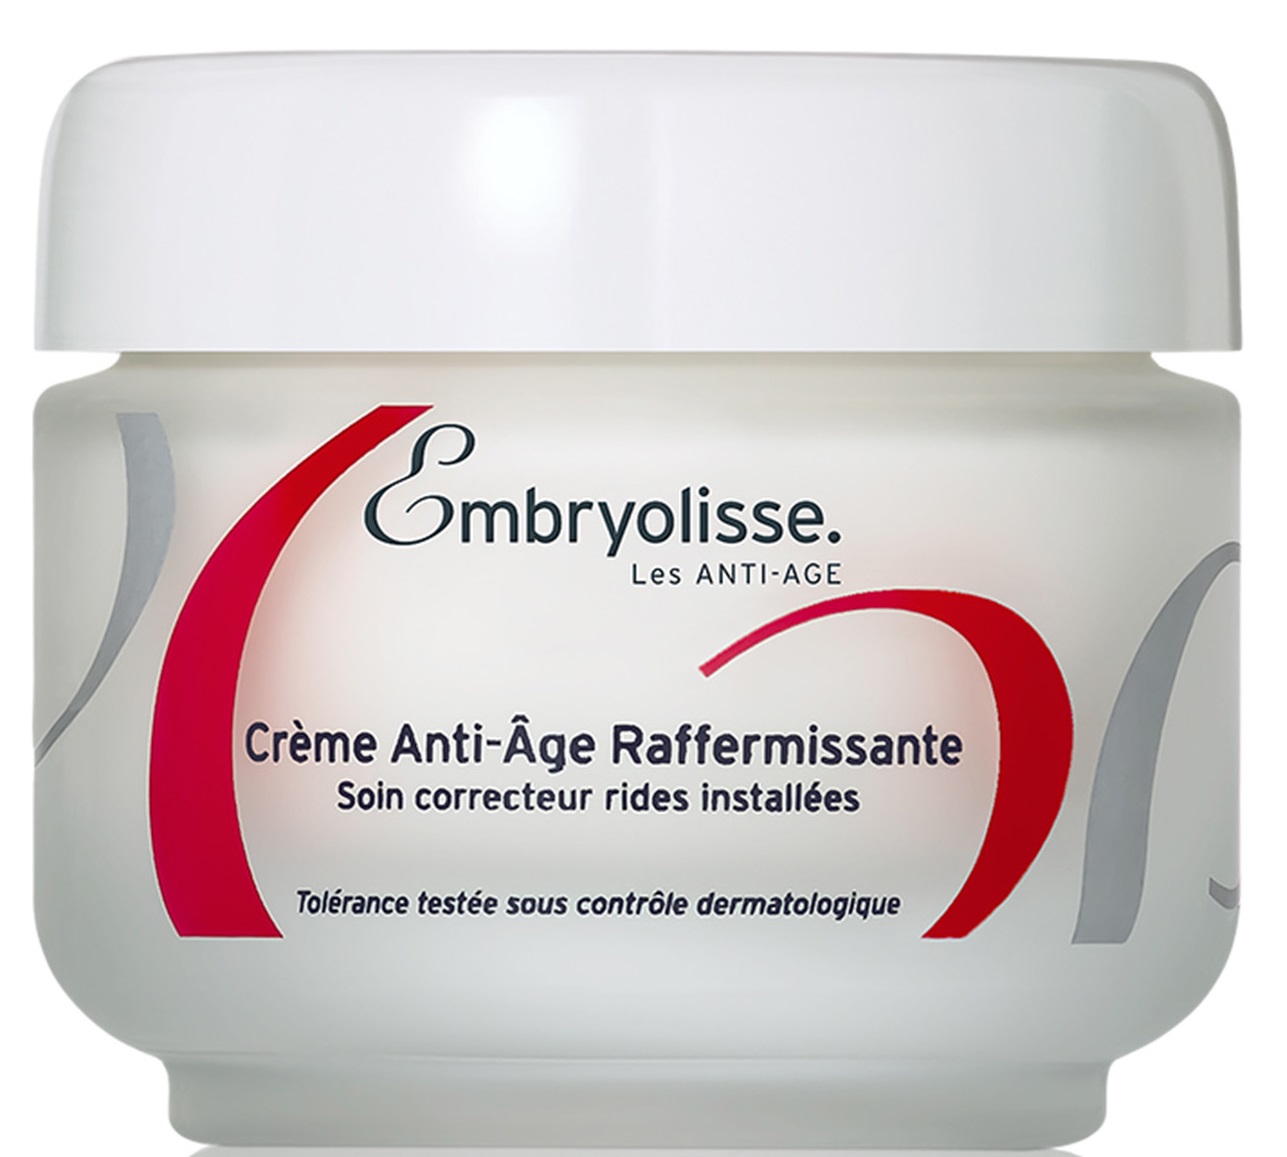 Best skin care products for anti aging and acne, Account Options